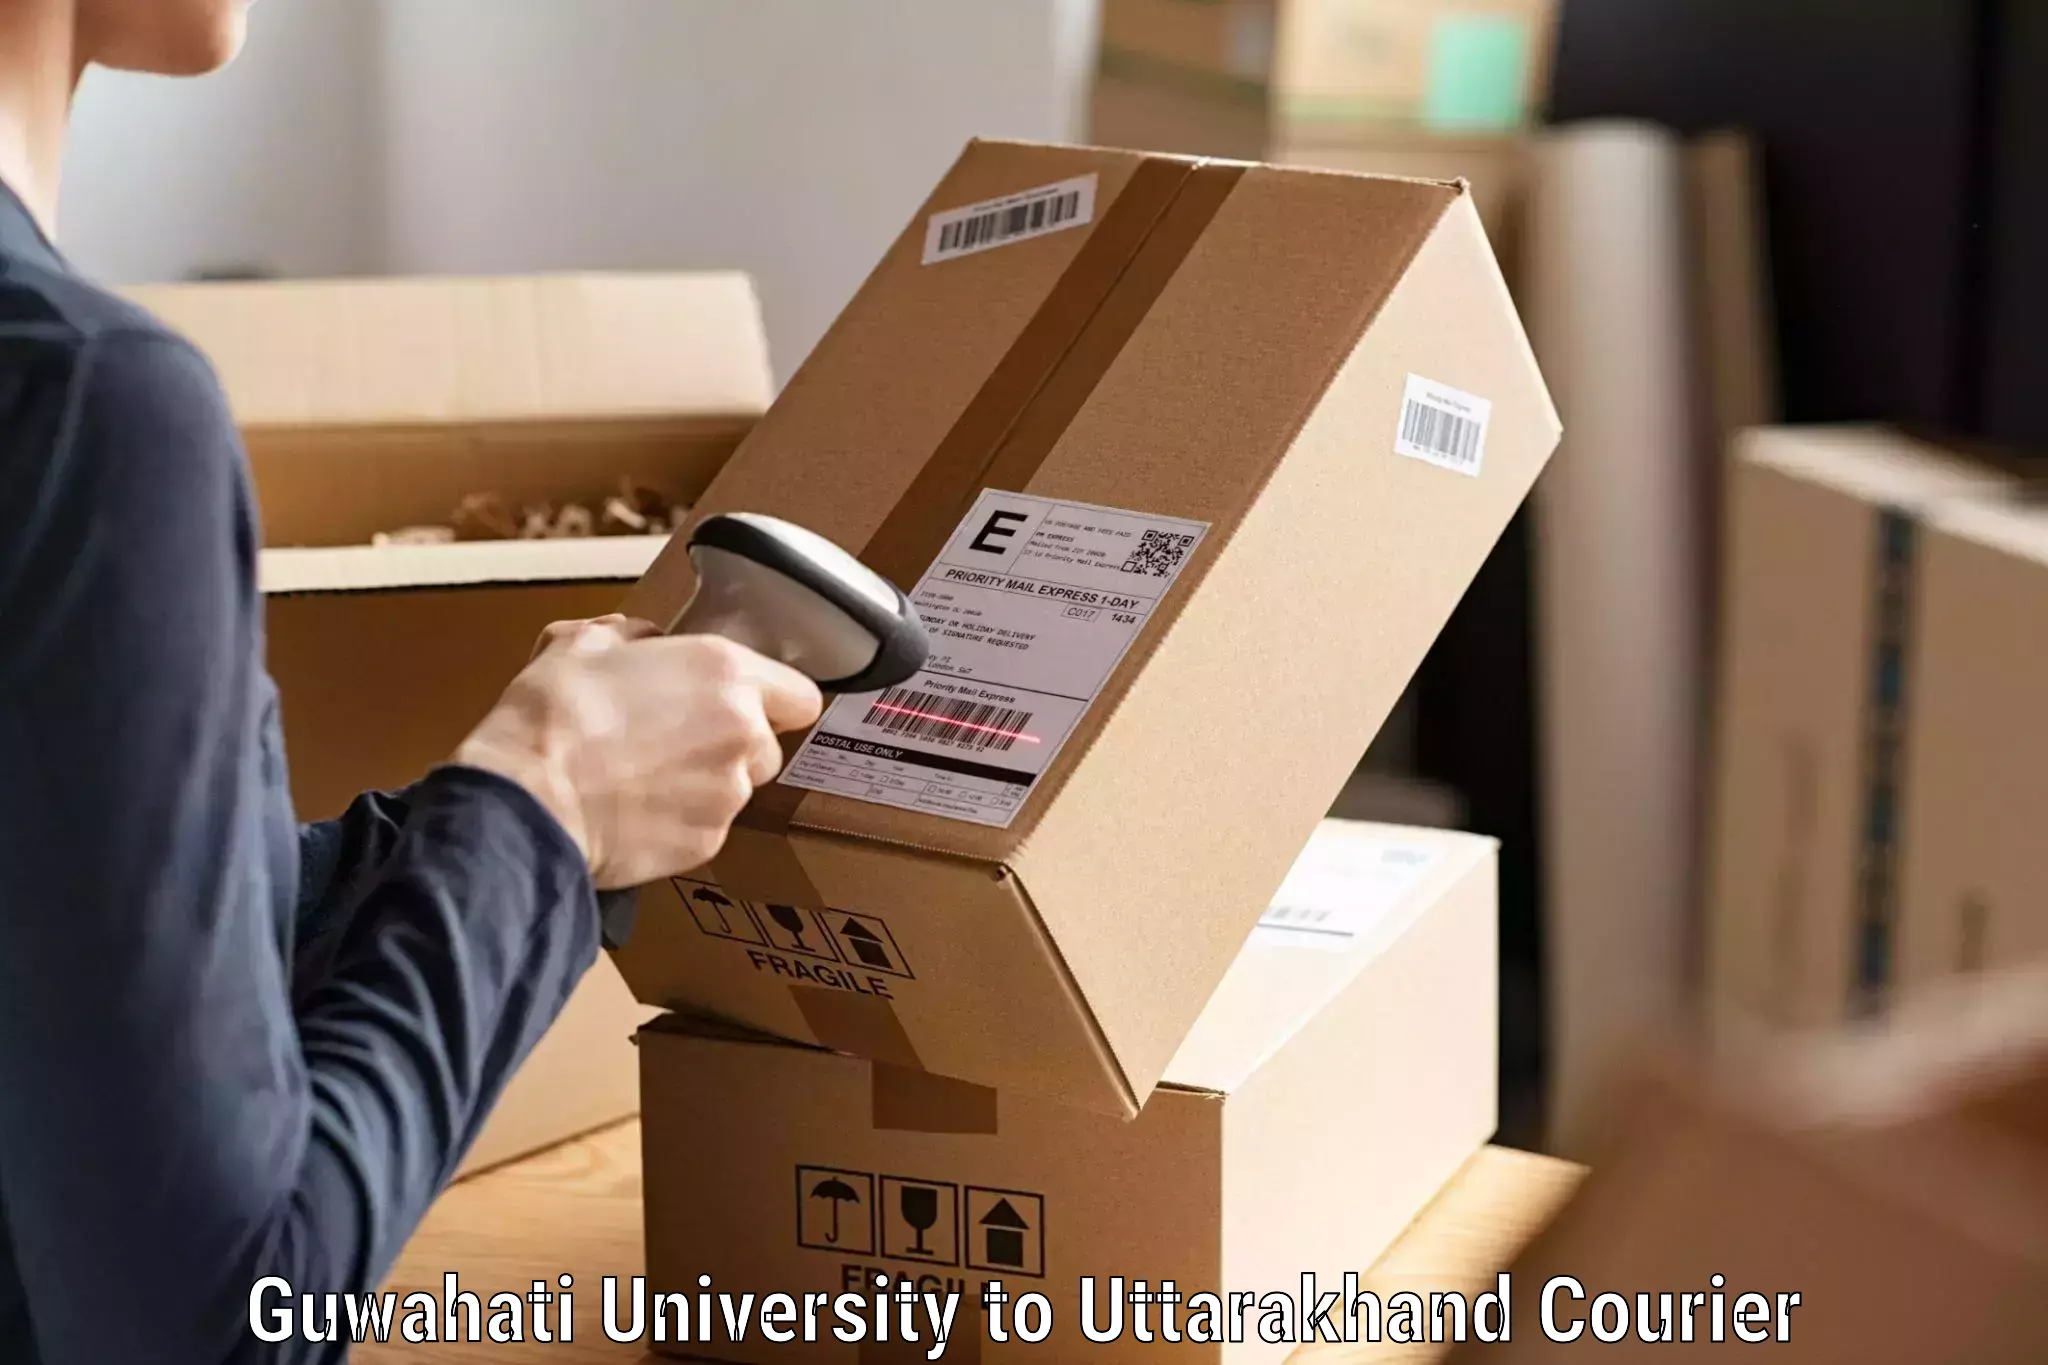 Reliable courier service Guwahati University to Bhagwanpur